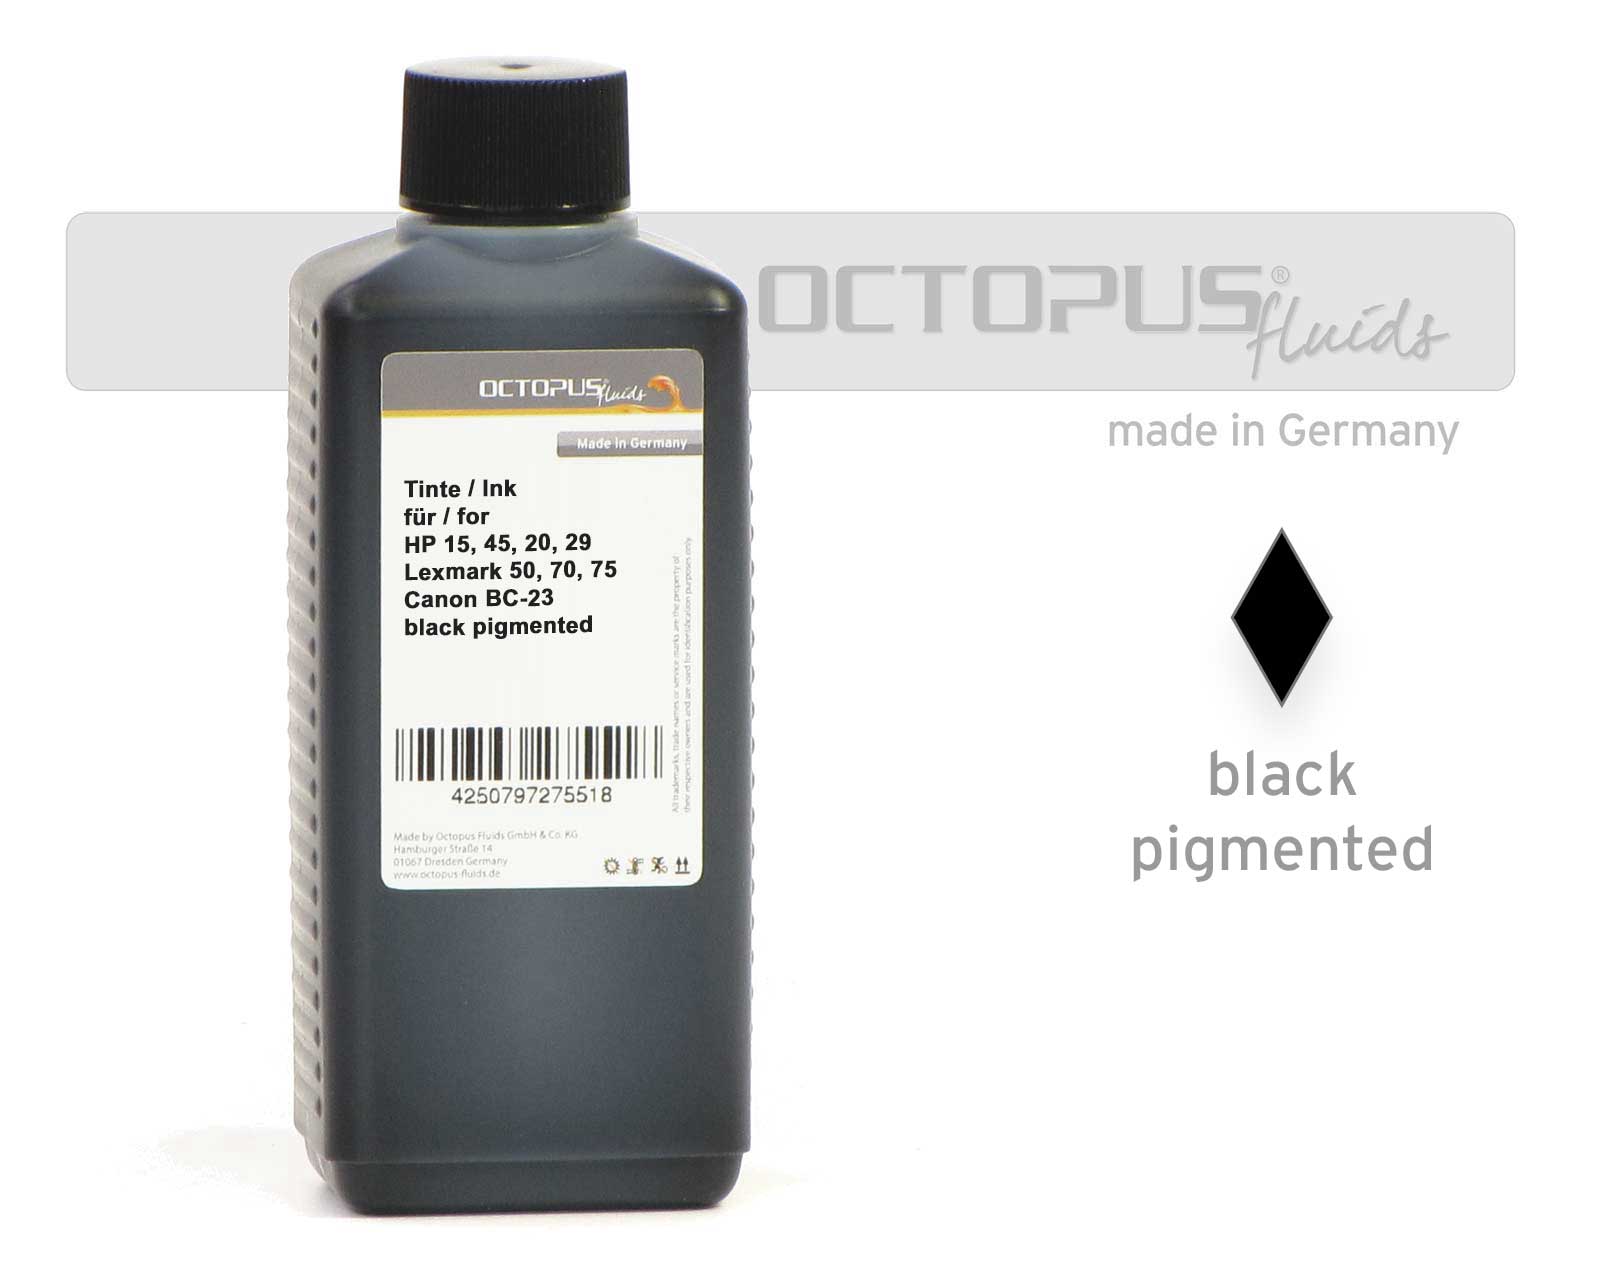 Octopus Refill Ink for HP 15, 45, 20, 29, Lexmark 50, 70, 75, Addmaster 97091, Canon BC-23 black